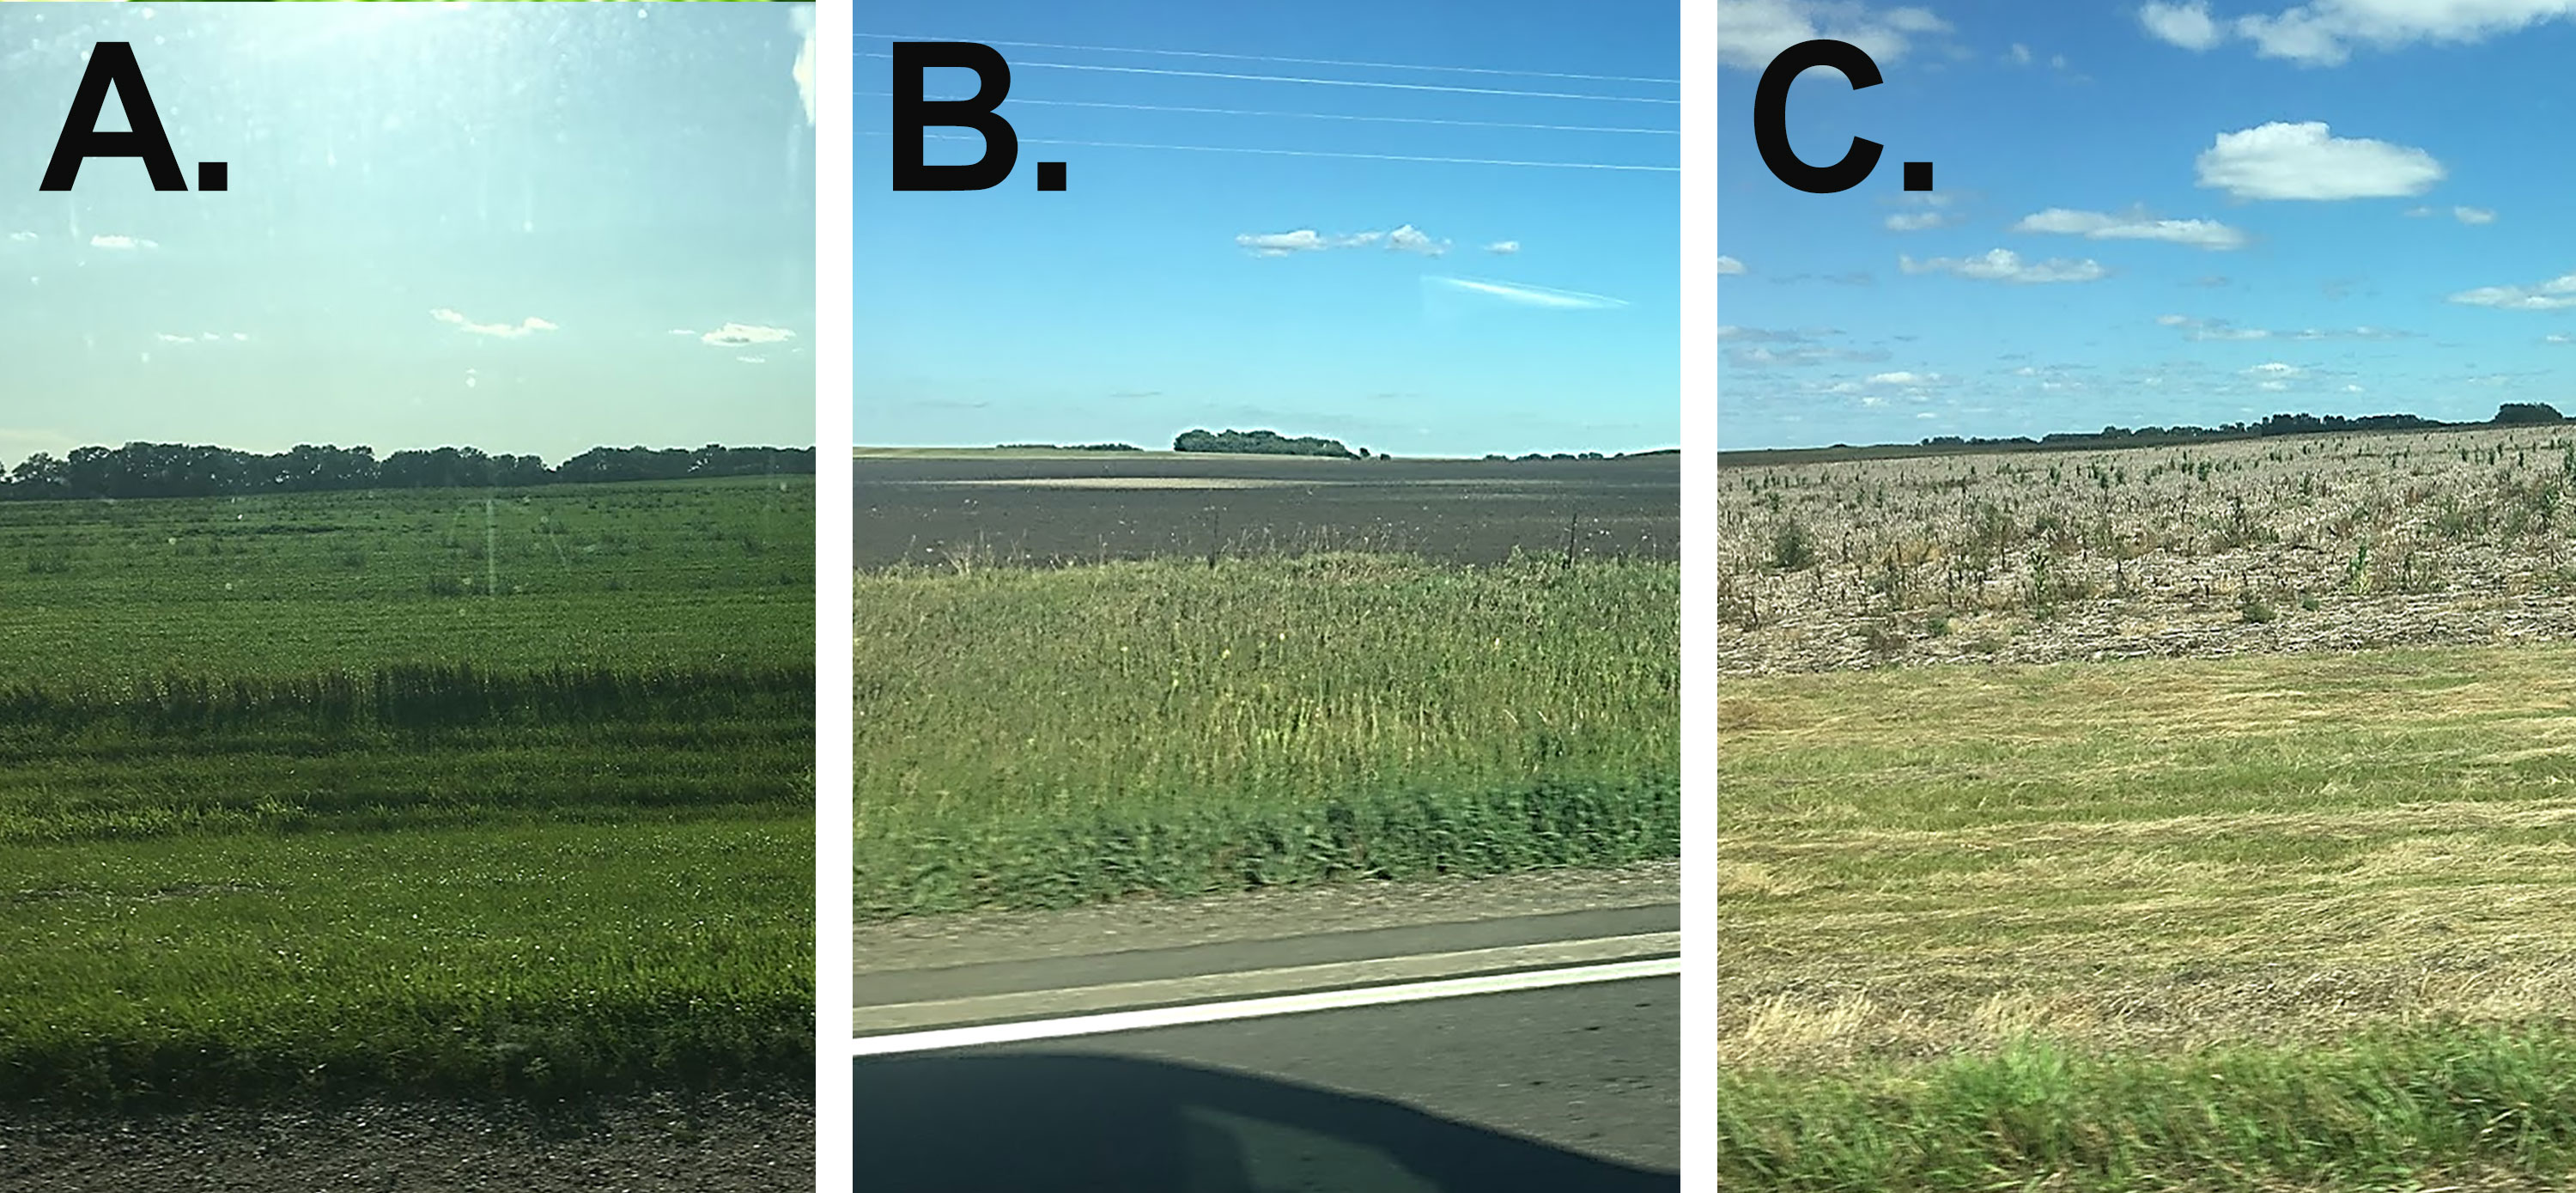 Three South Dakota fields that claimed prevent plant. The first field is labeled &quot;A&quot; and is planted with a cover crop. The second field is labeled &quot;B&quot; and has no cover crops, but tillage was completed to control weeds. The third is labeled &quot;C&quot; and has no cover crops and weeds are growing throughout.